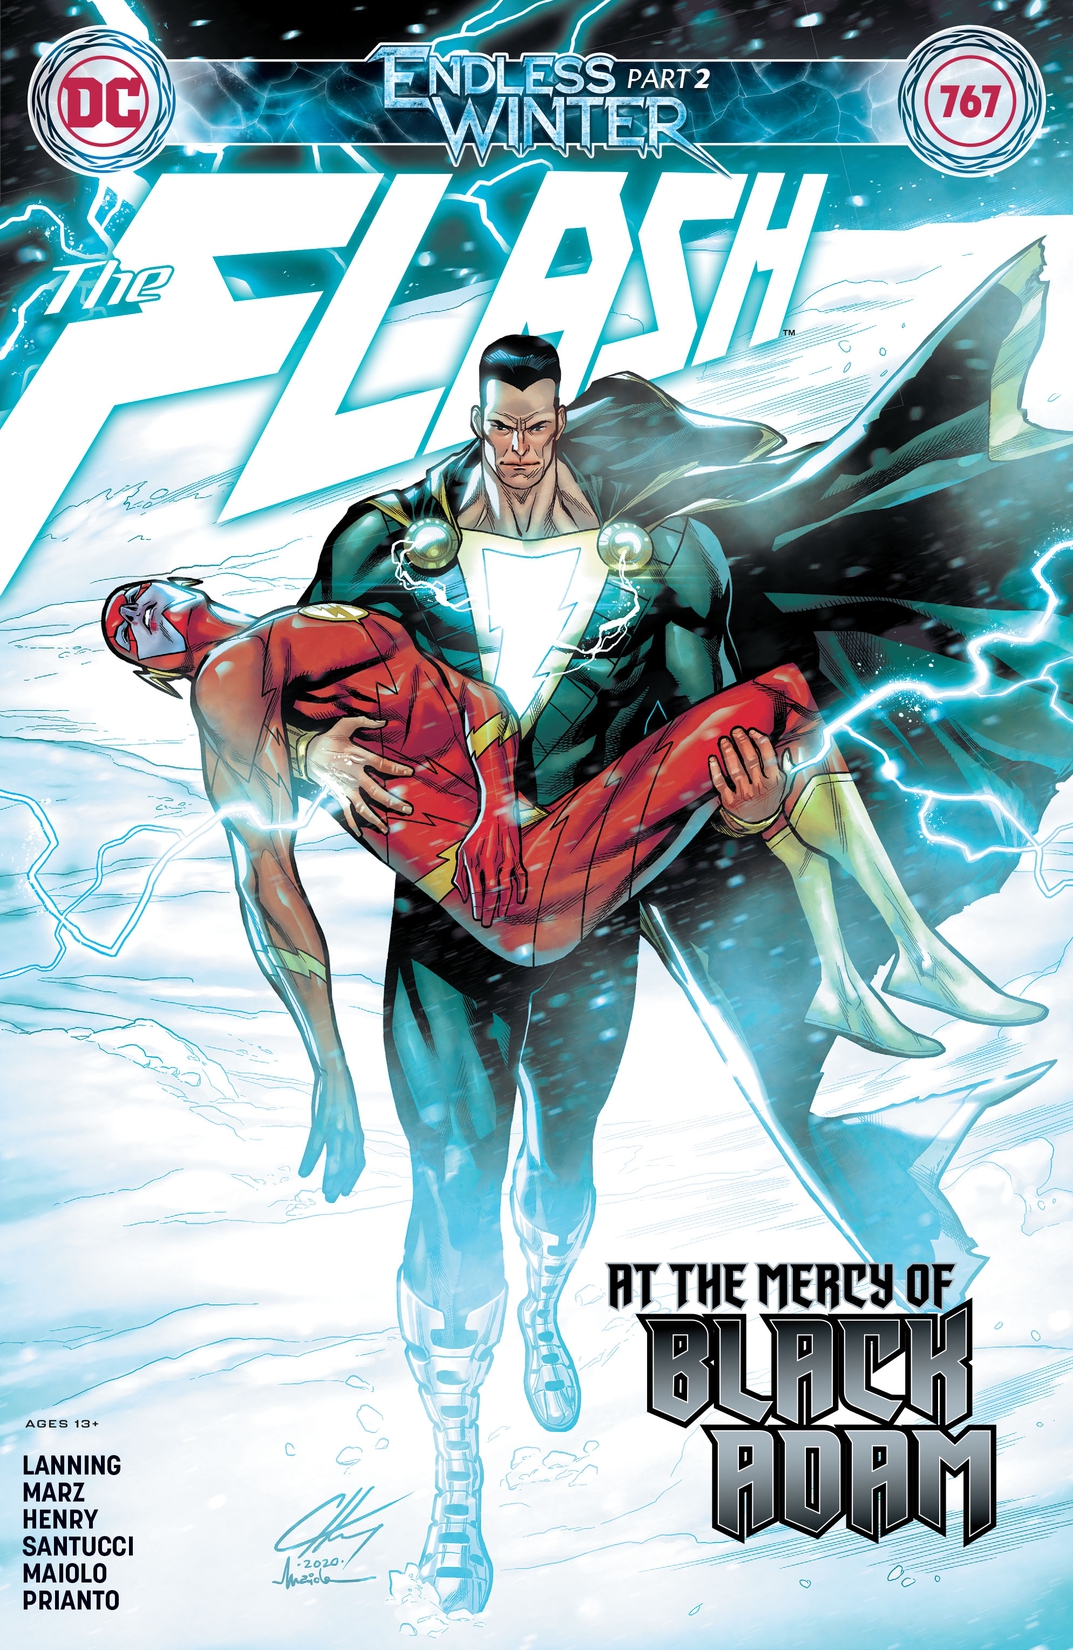 The Flash (2016-) #767 preview images